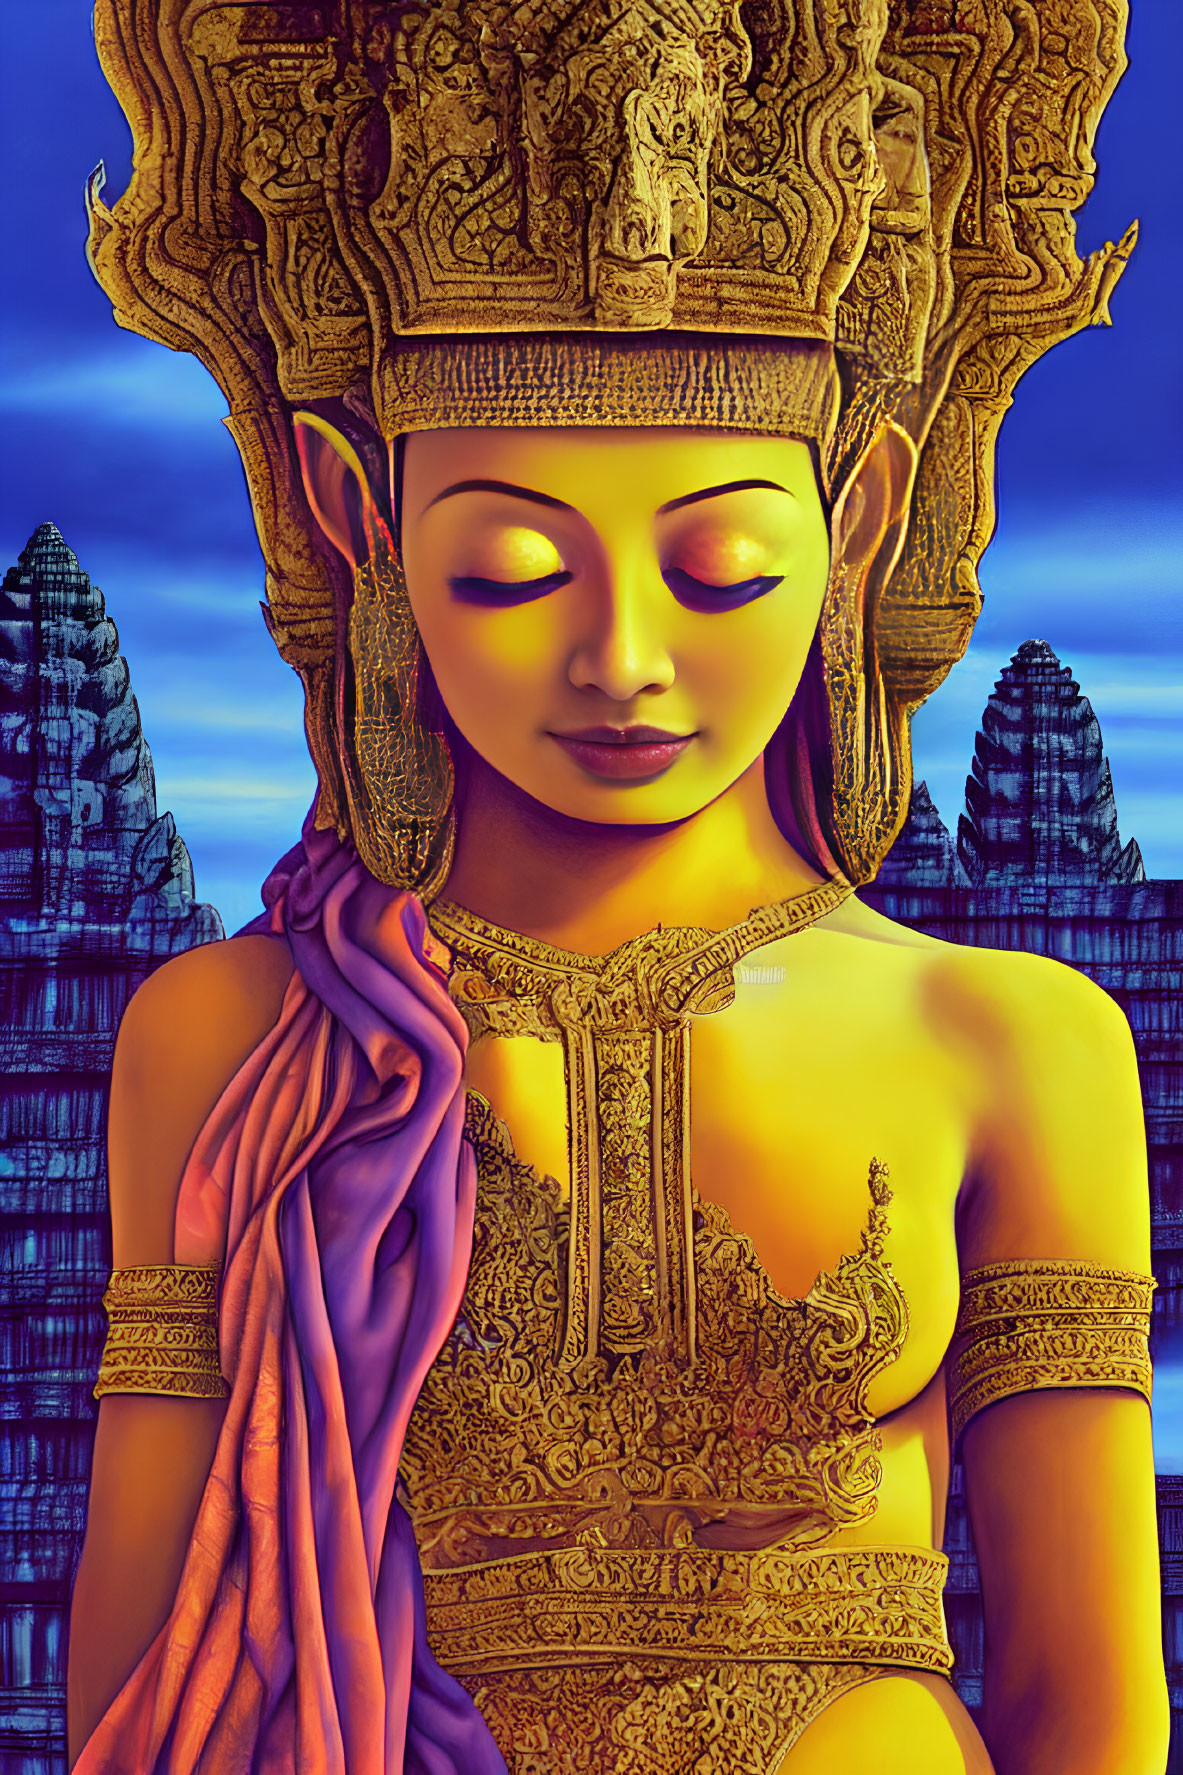 Serene golden figure in Khmer headpiece with purple draping, Angkor Wat temples background